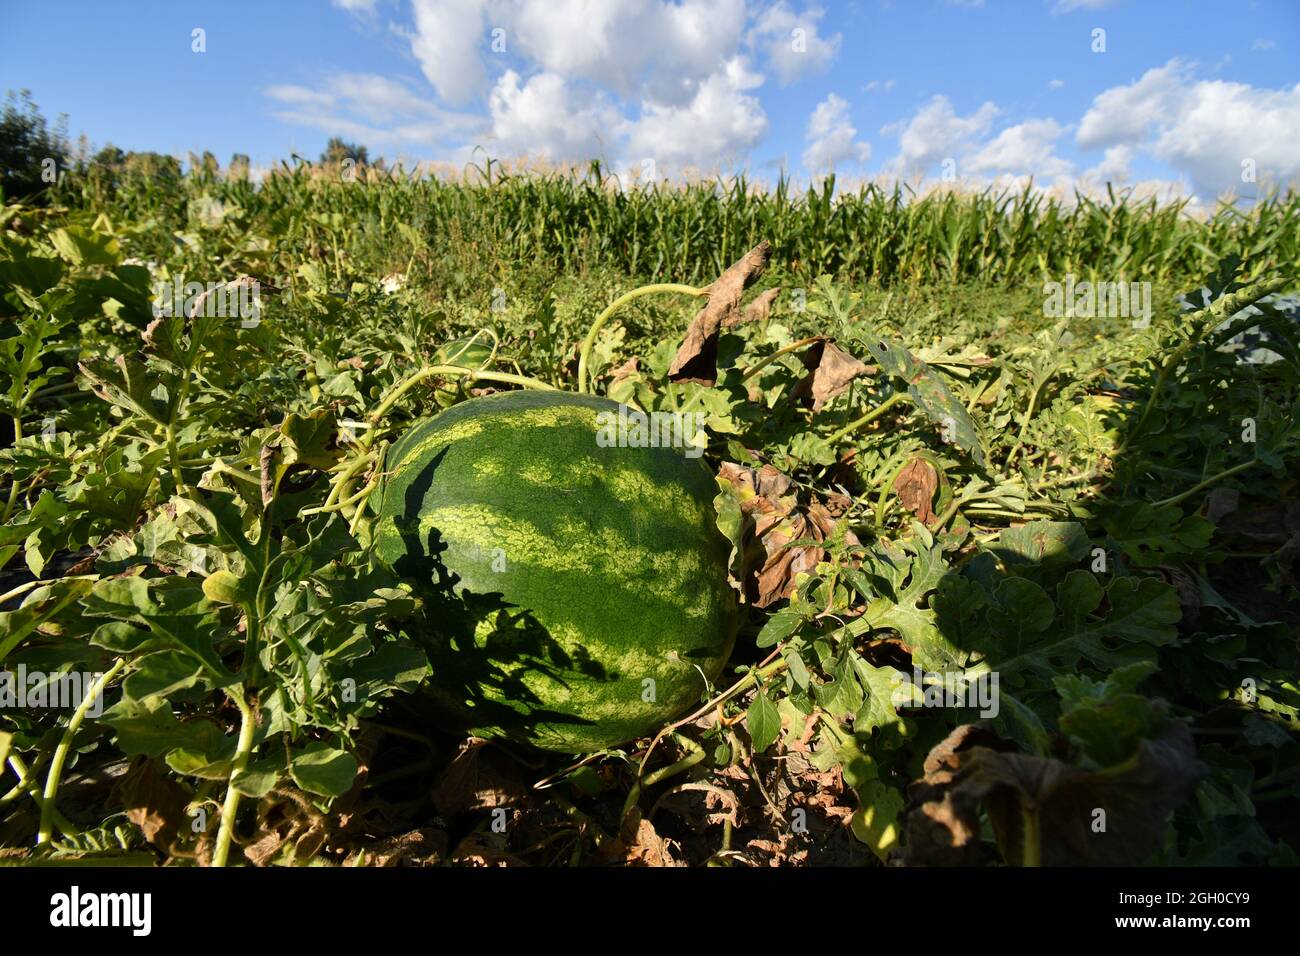 Watermelon on the ground between the green leaves Stock Photo